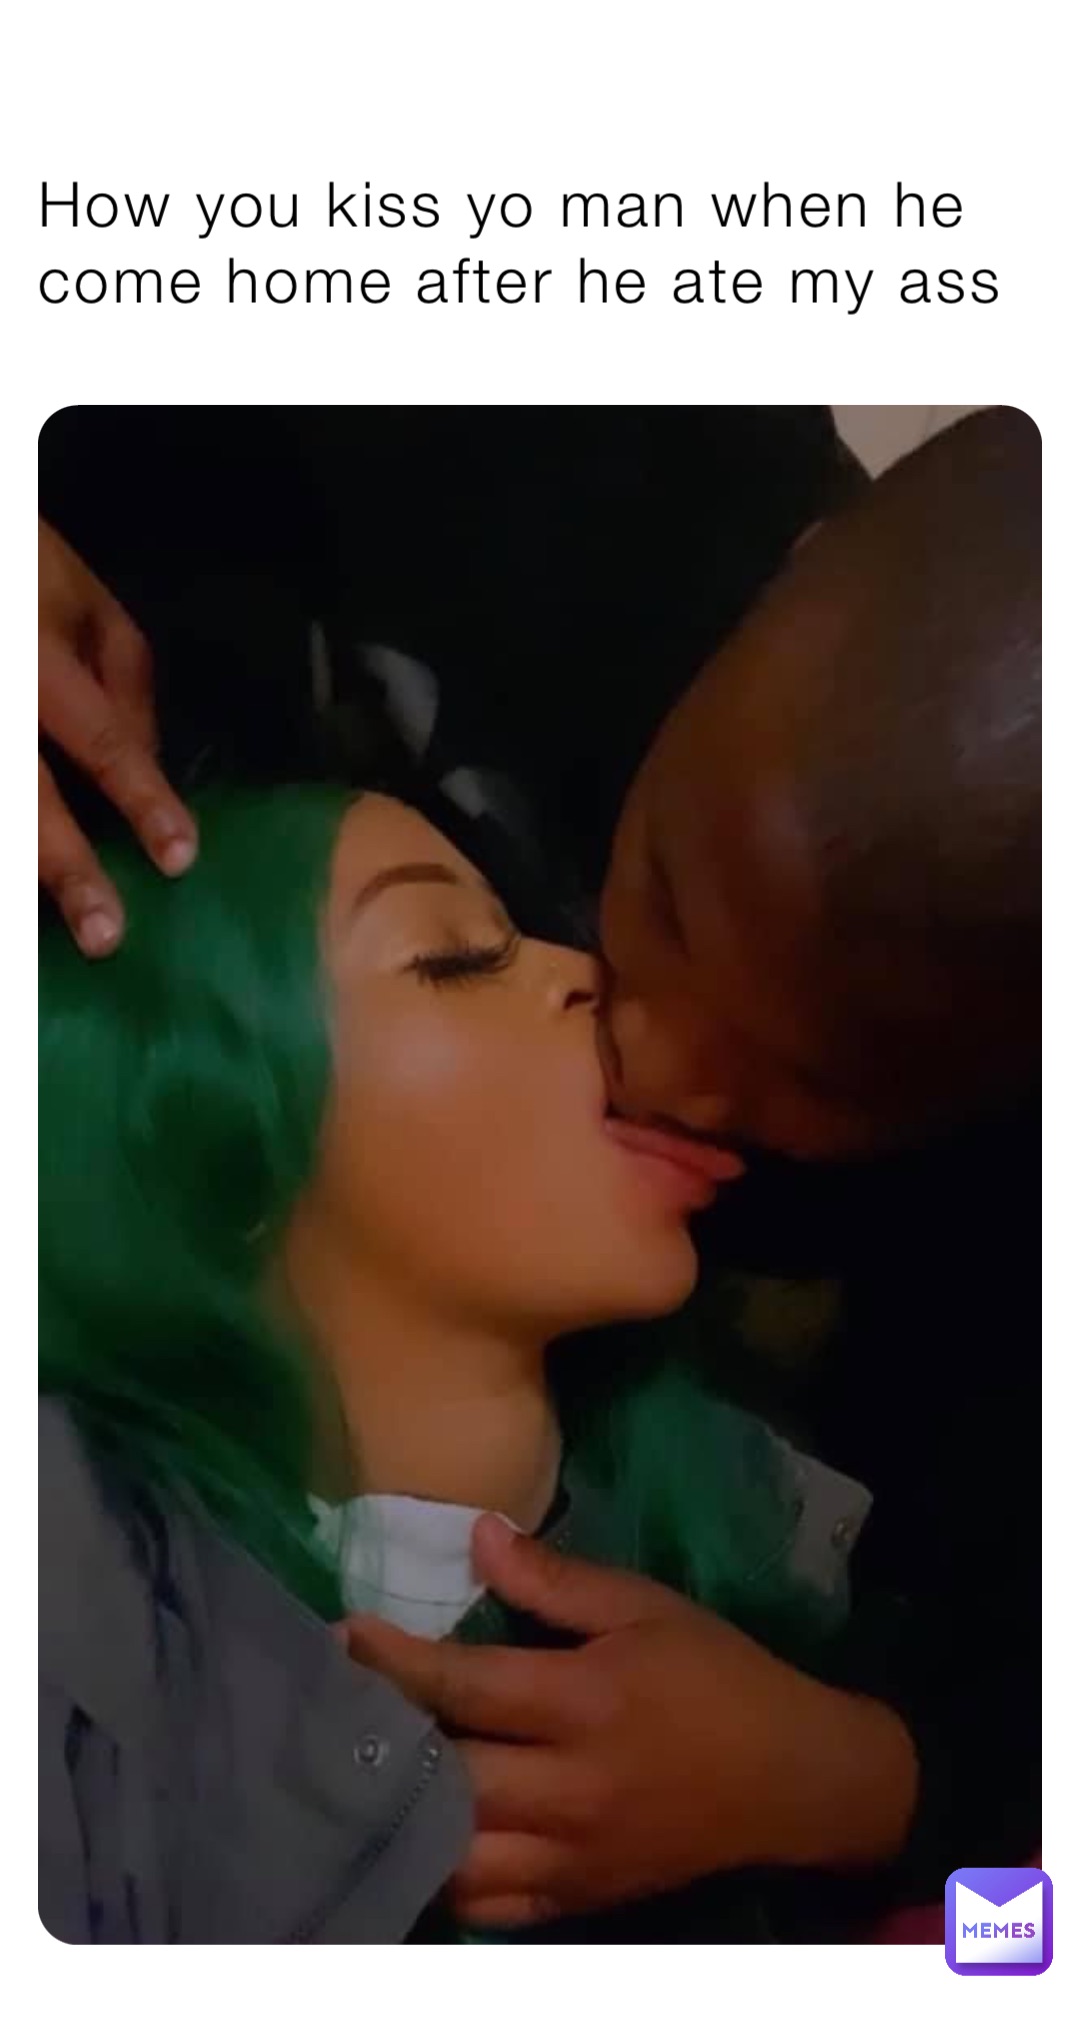 How you kiss yo man when he come home after he ate my ass